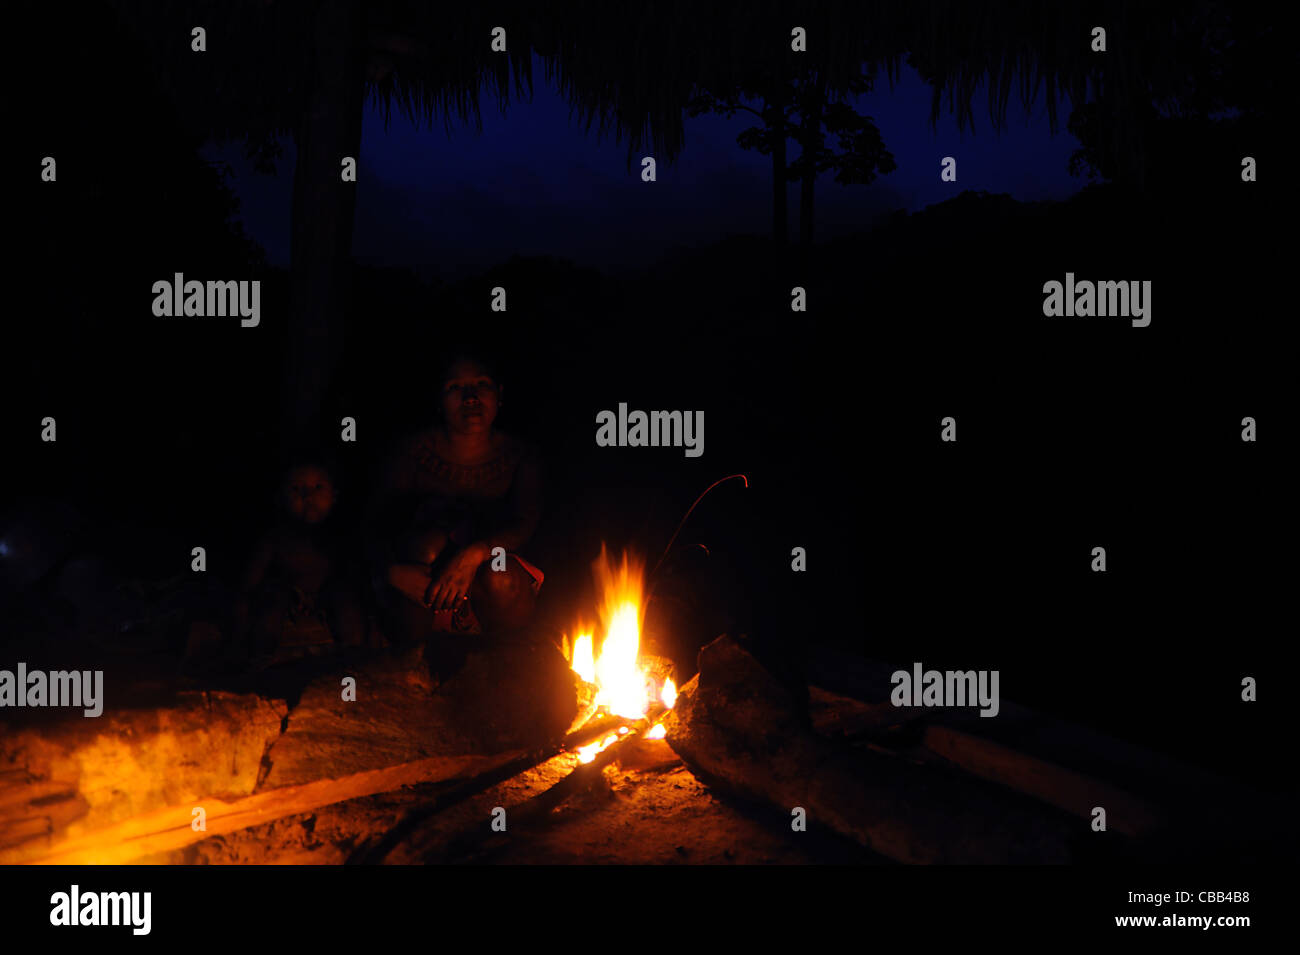 Embera Indian mother and son behind a bonfire in the jungle during the nightfall at the Embera Puru community in Panama Stock Photo